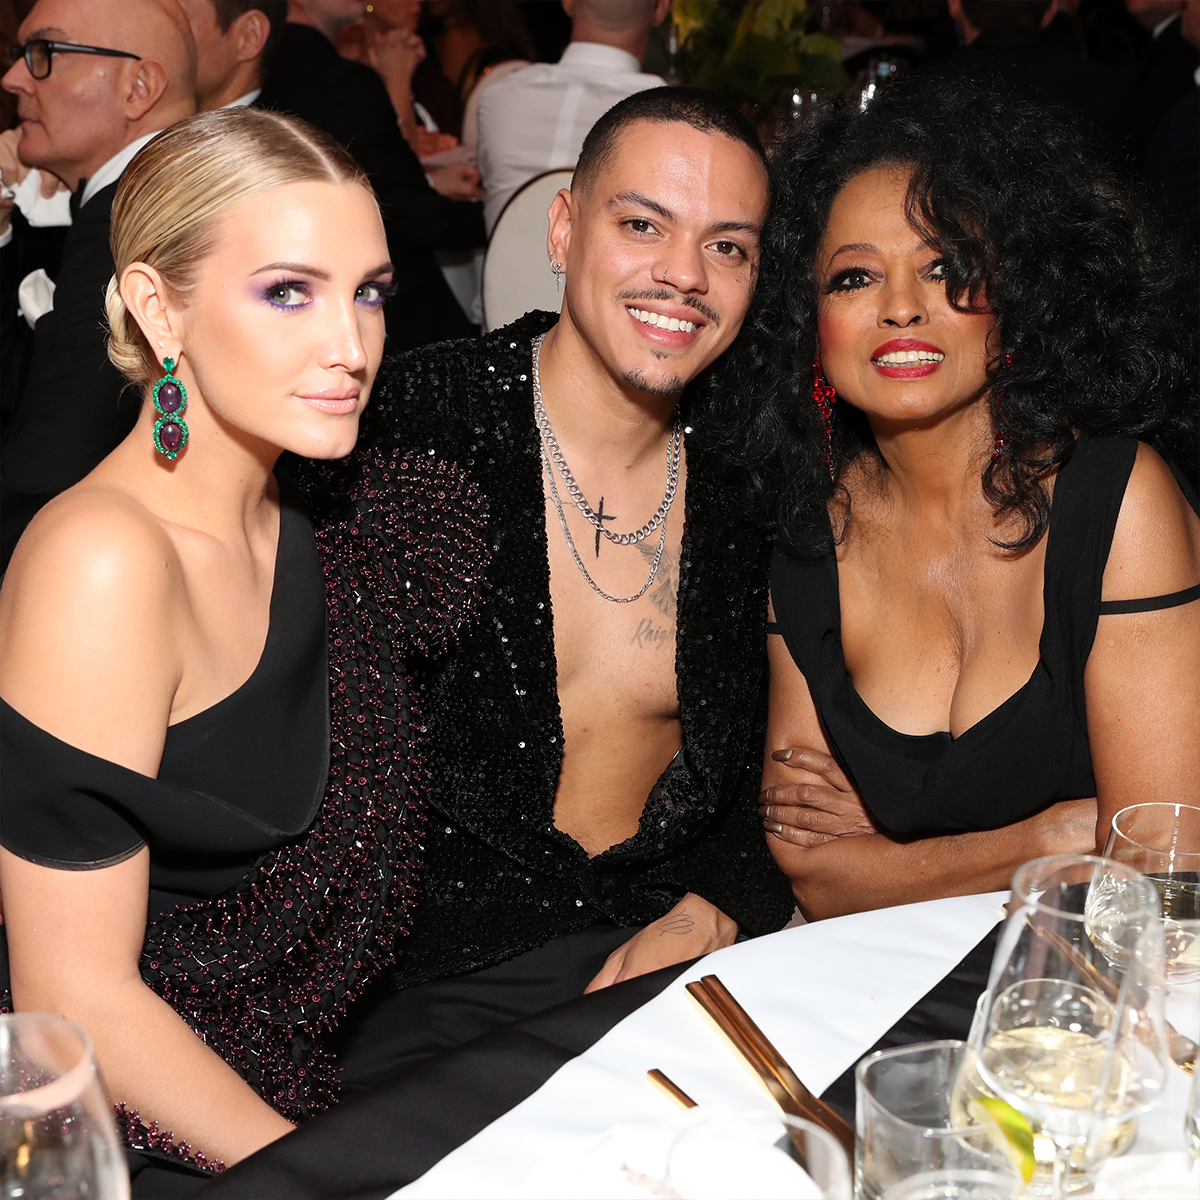 Ashlee Simpson - Ashlee Simpson-Ross News, Pictures, and Videos - E! Online